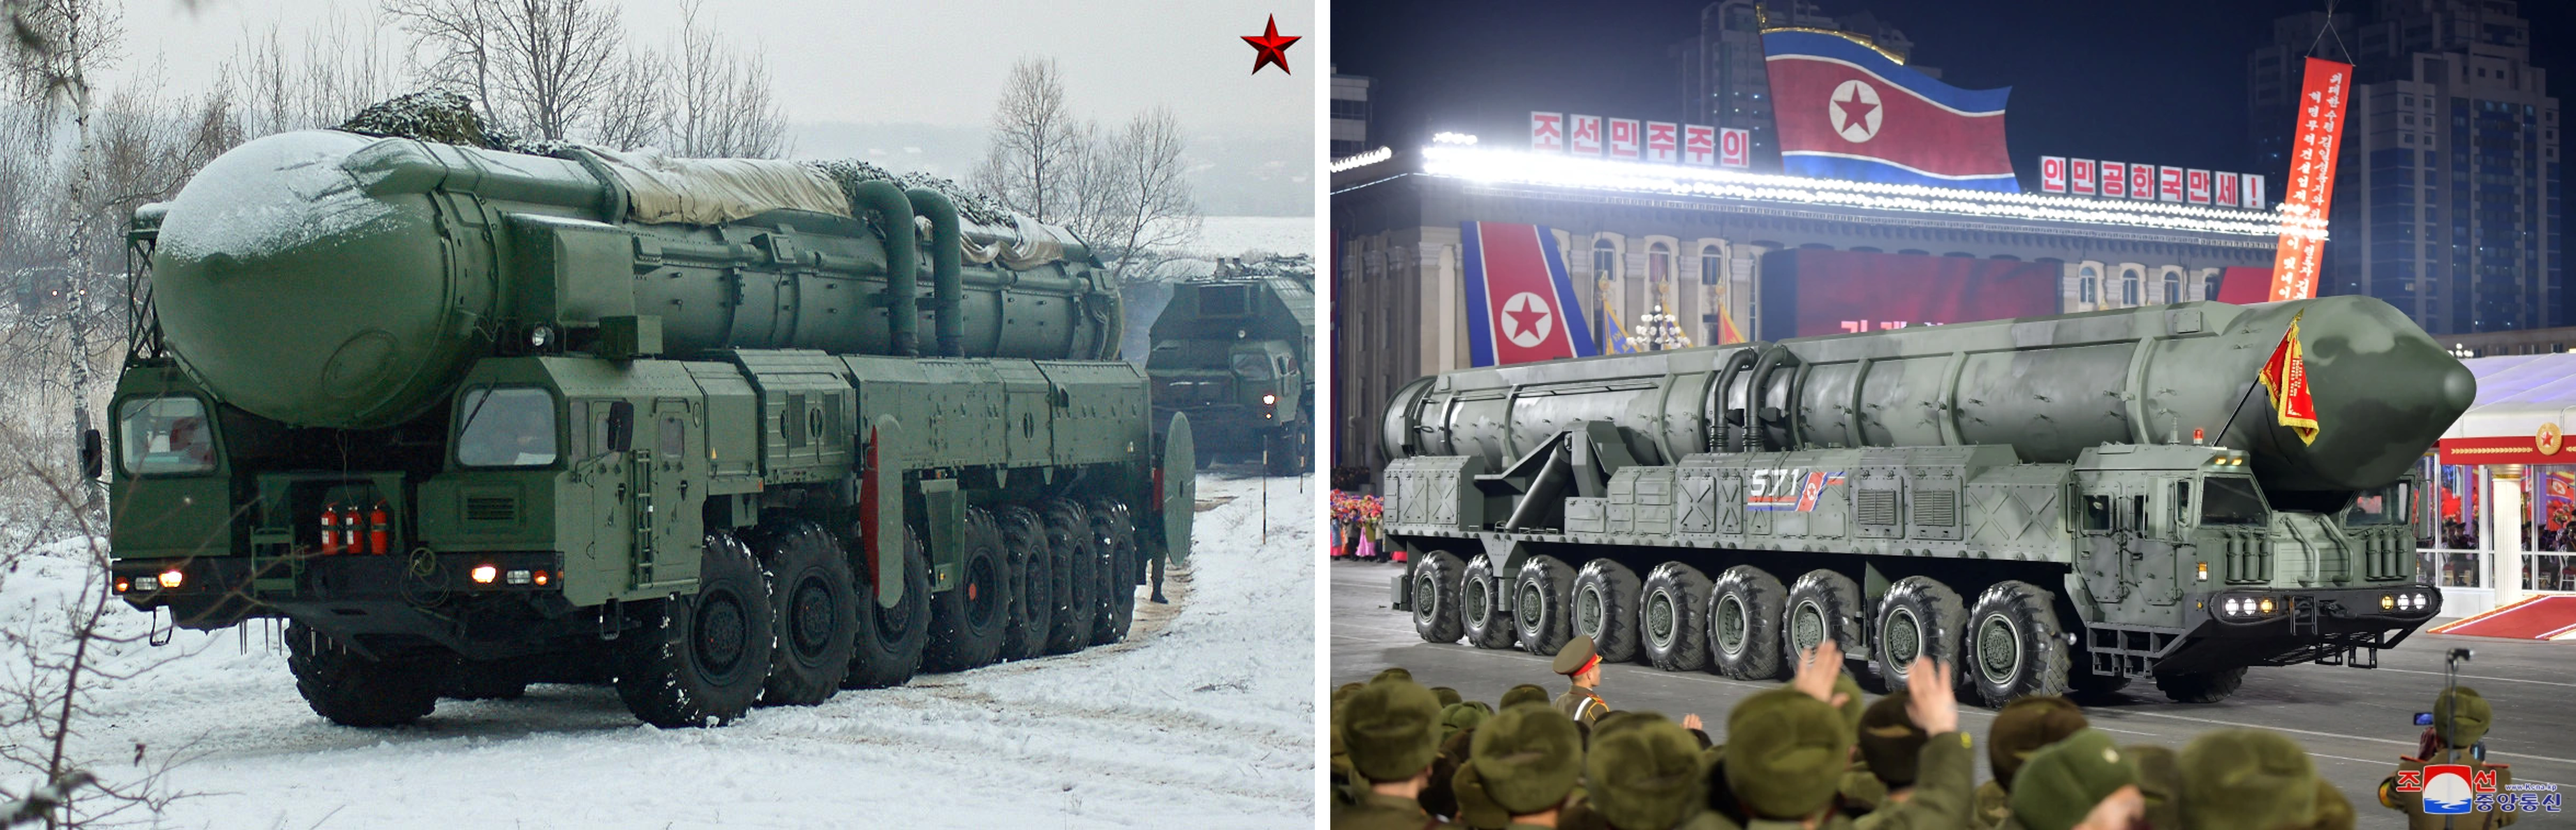 Figure 1. Left: the Soviet RS-12M missile is carried by a 7-axles truck. Right: the solid-propellant ICBM showcased by the DPRK has a 11-axles truck. 